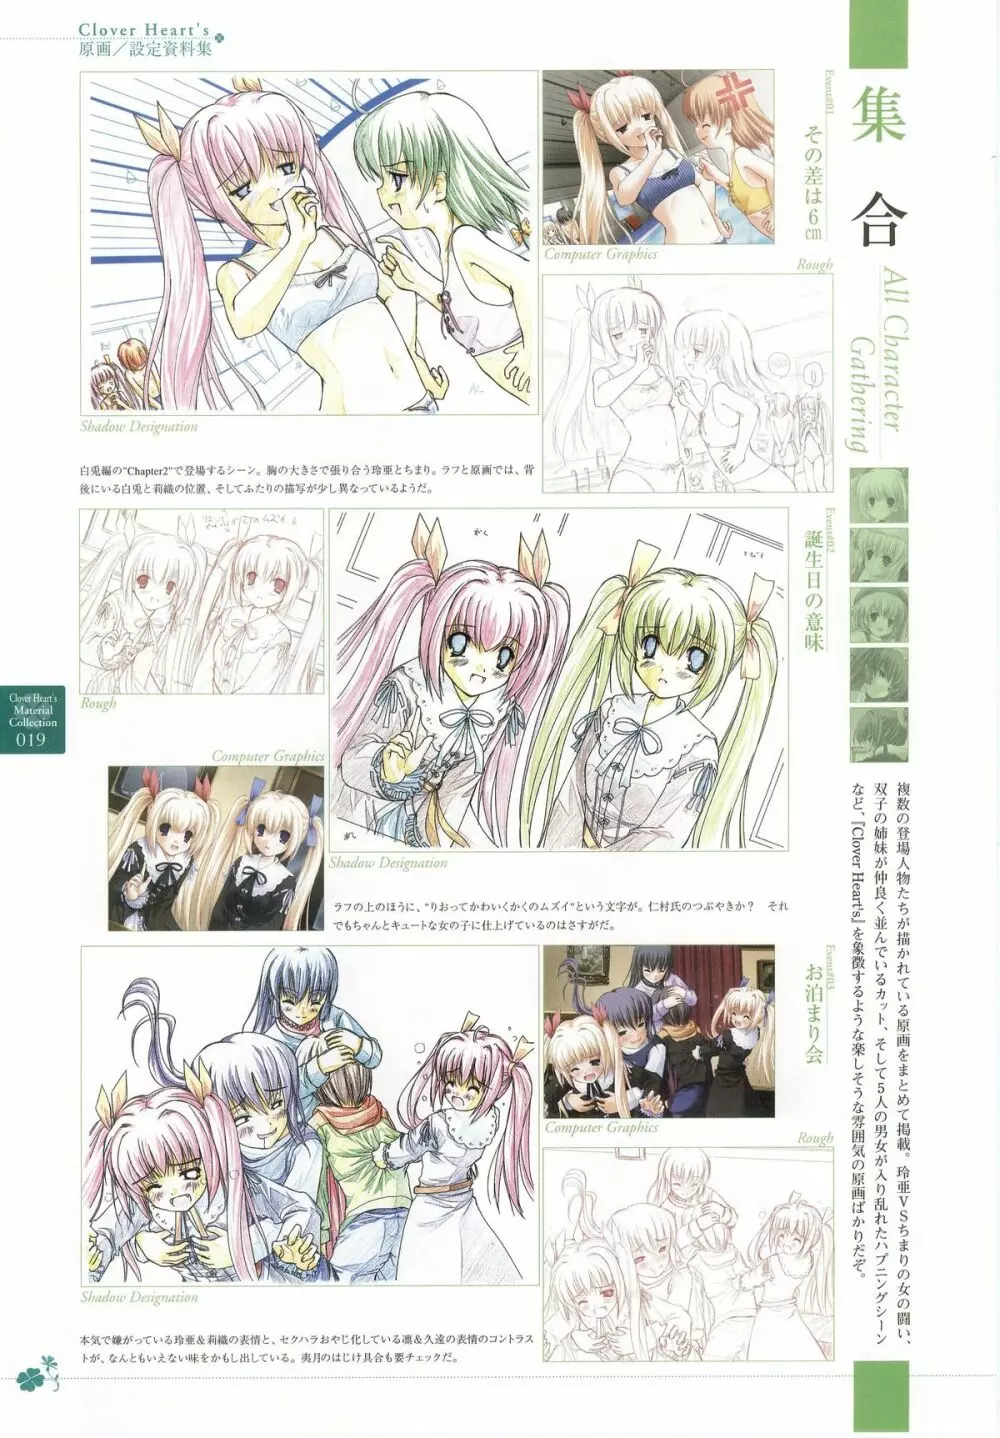 clover heart's visual fan book Page.128